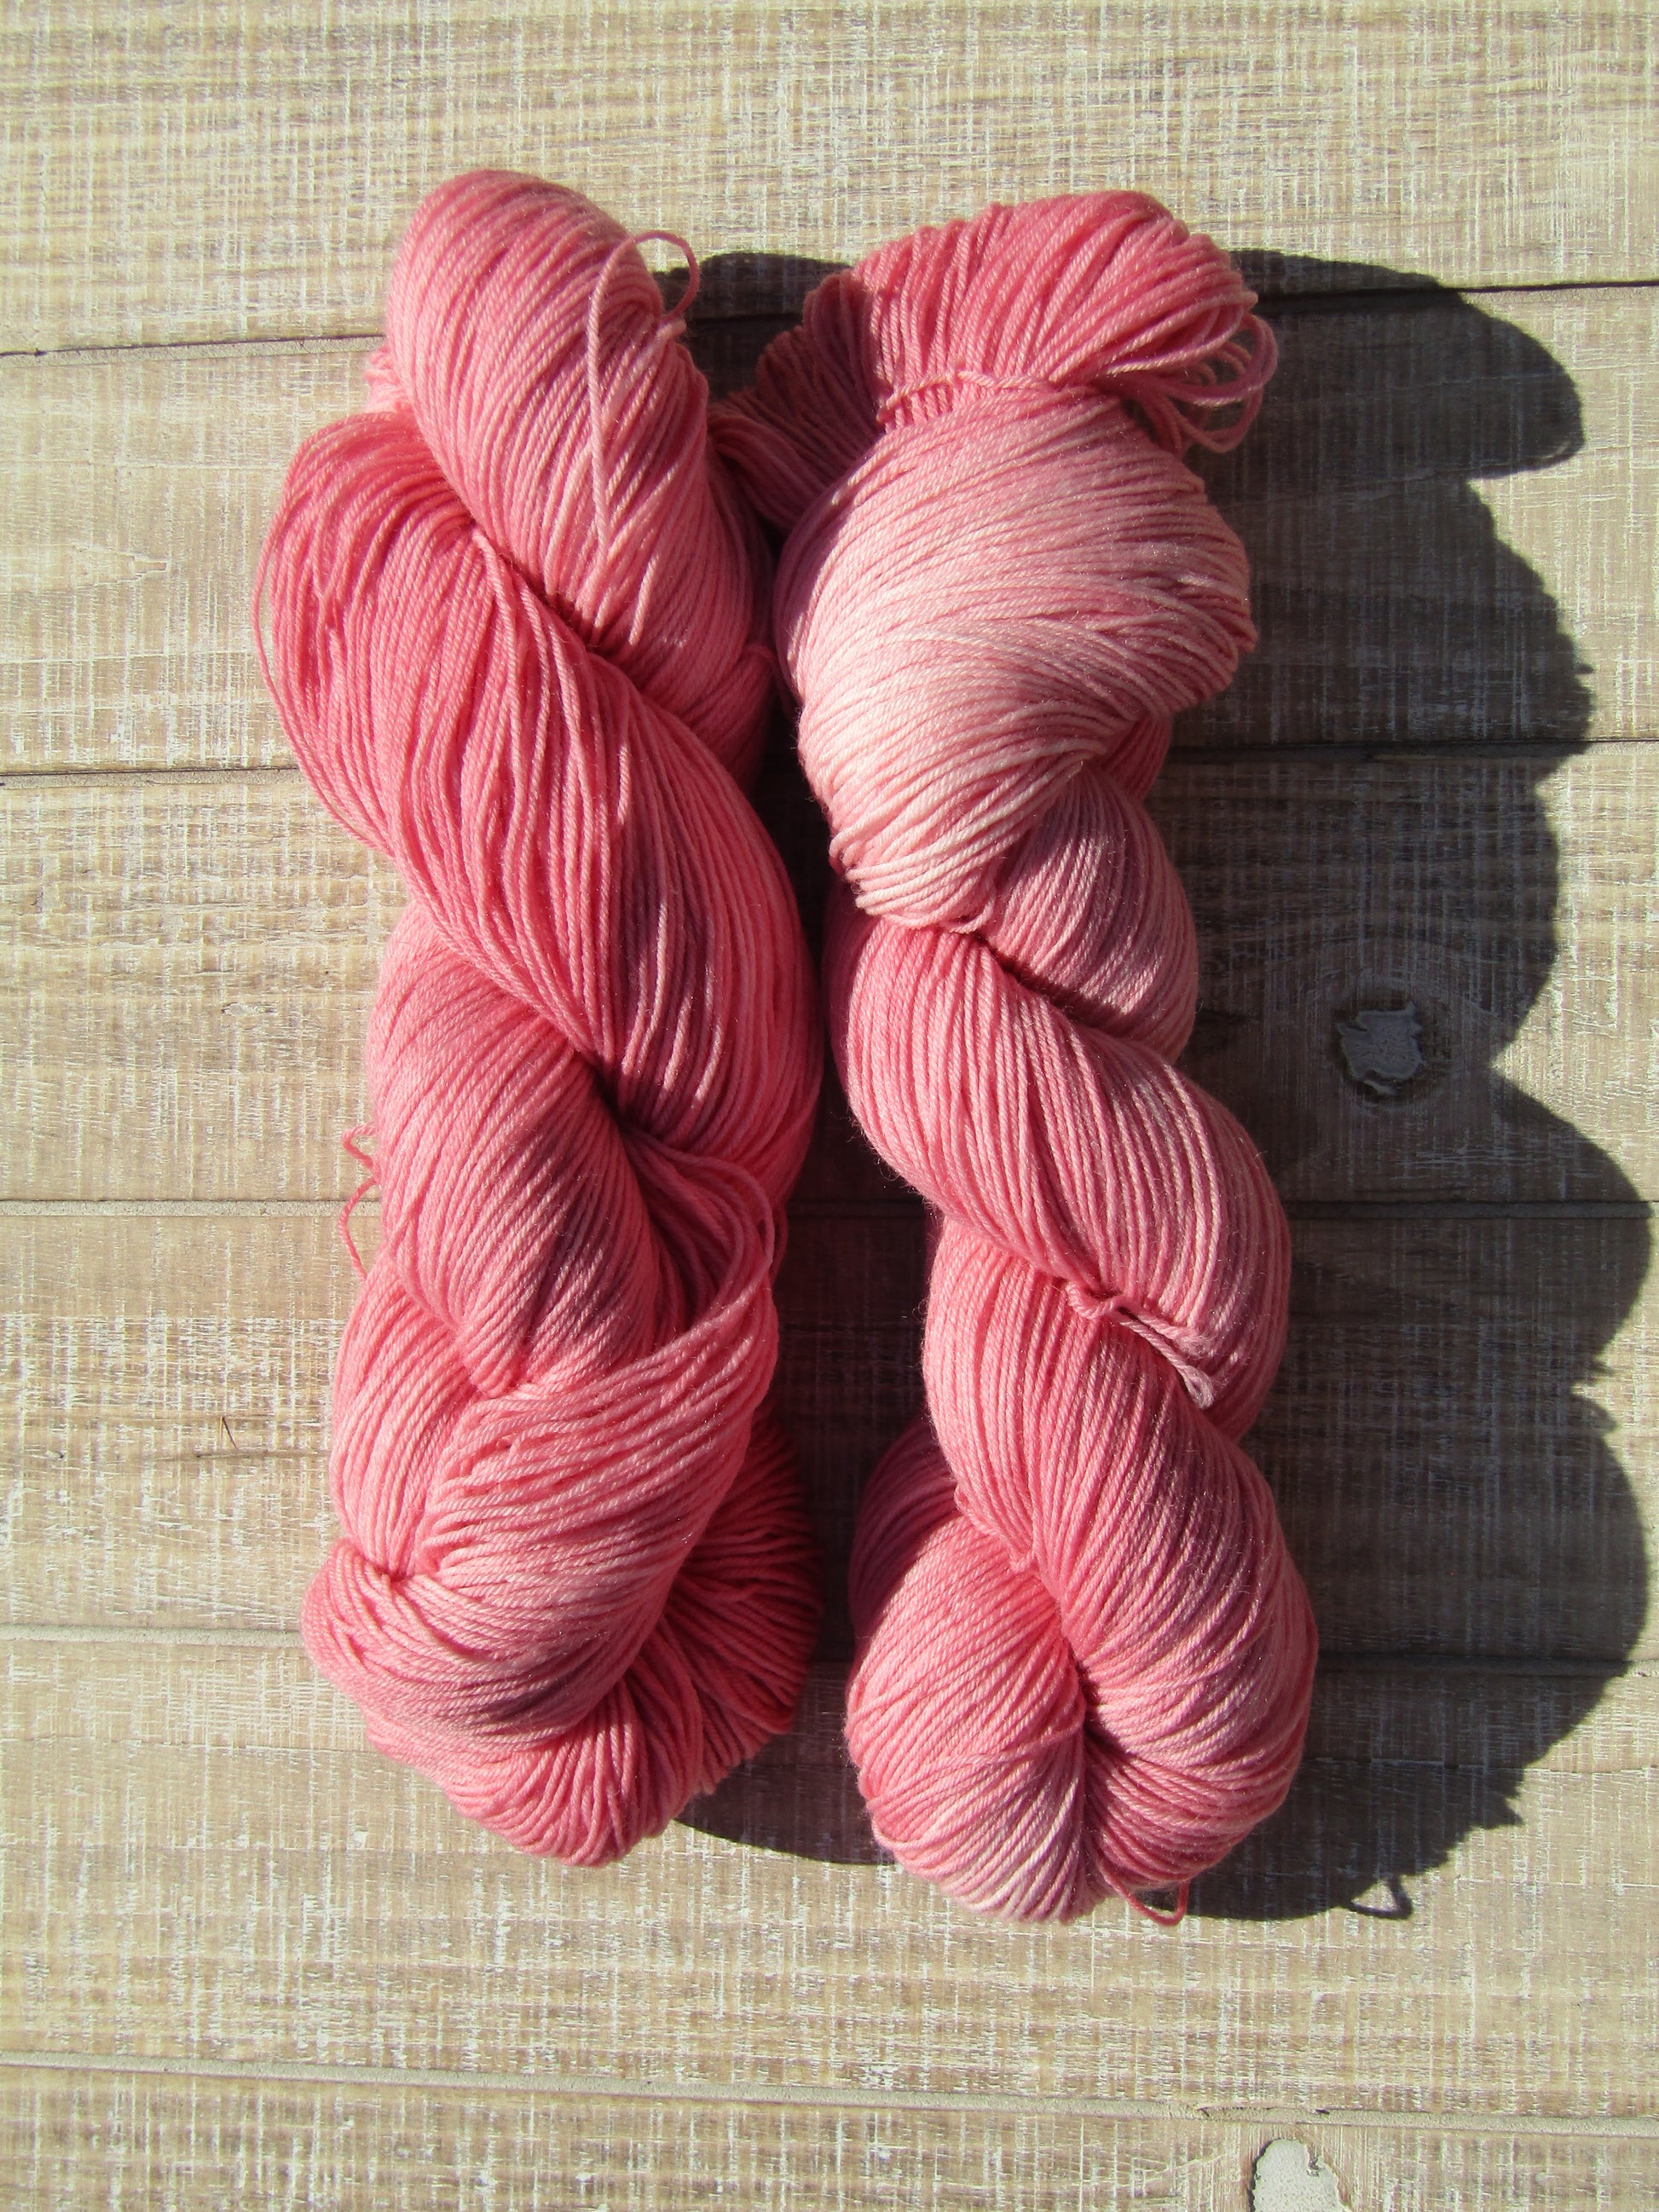 Hand-Dyed Yarn Sherry is russet colored.